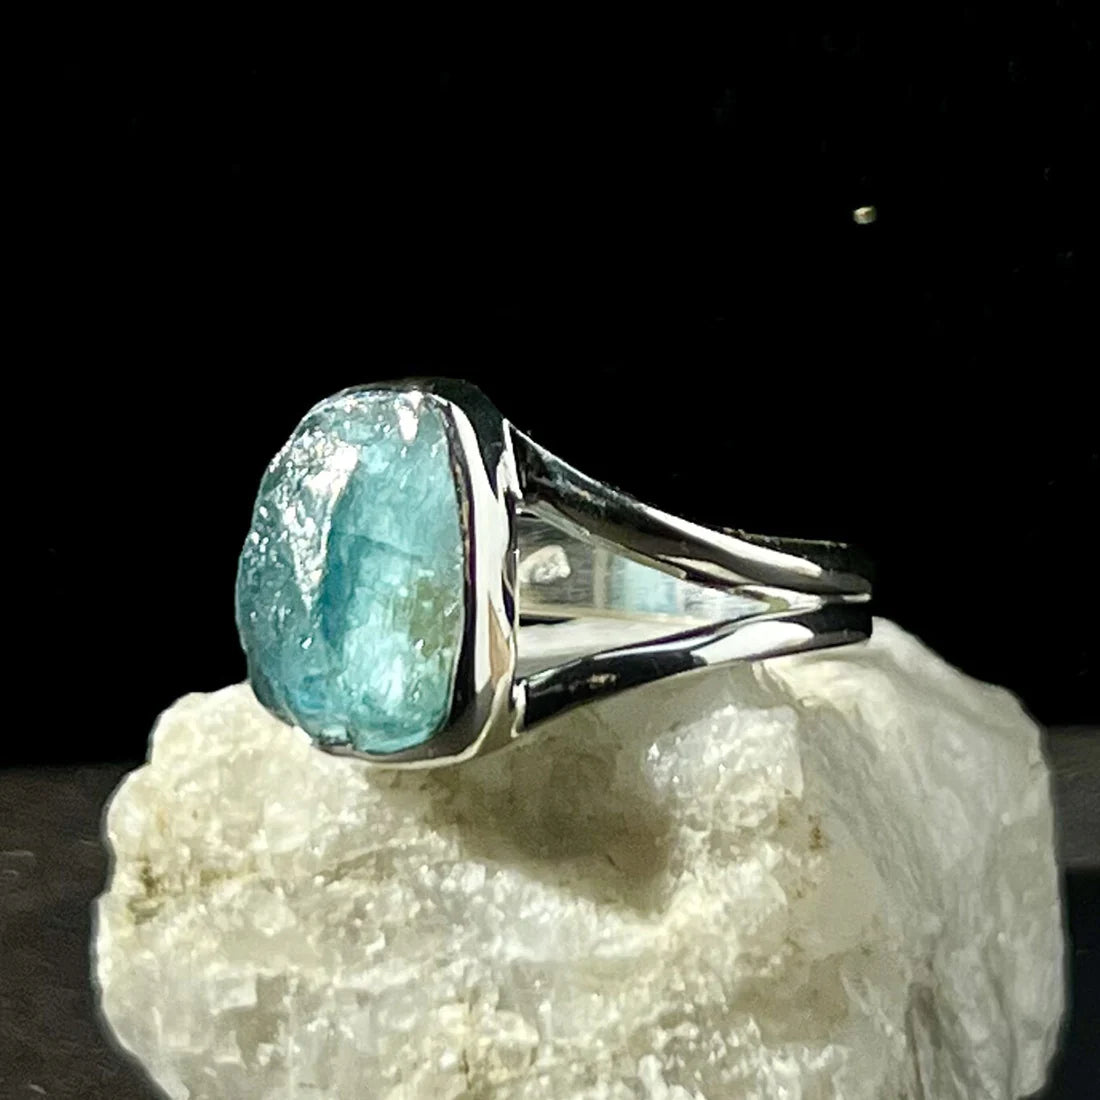 NEON BLUE APATITE RING IN STERLING SILVER